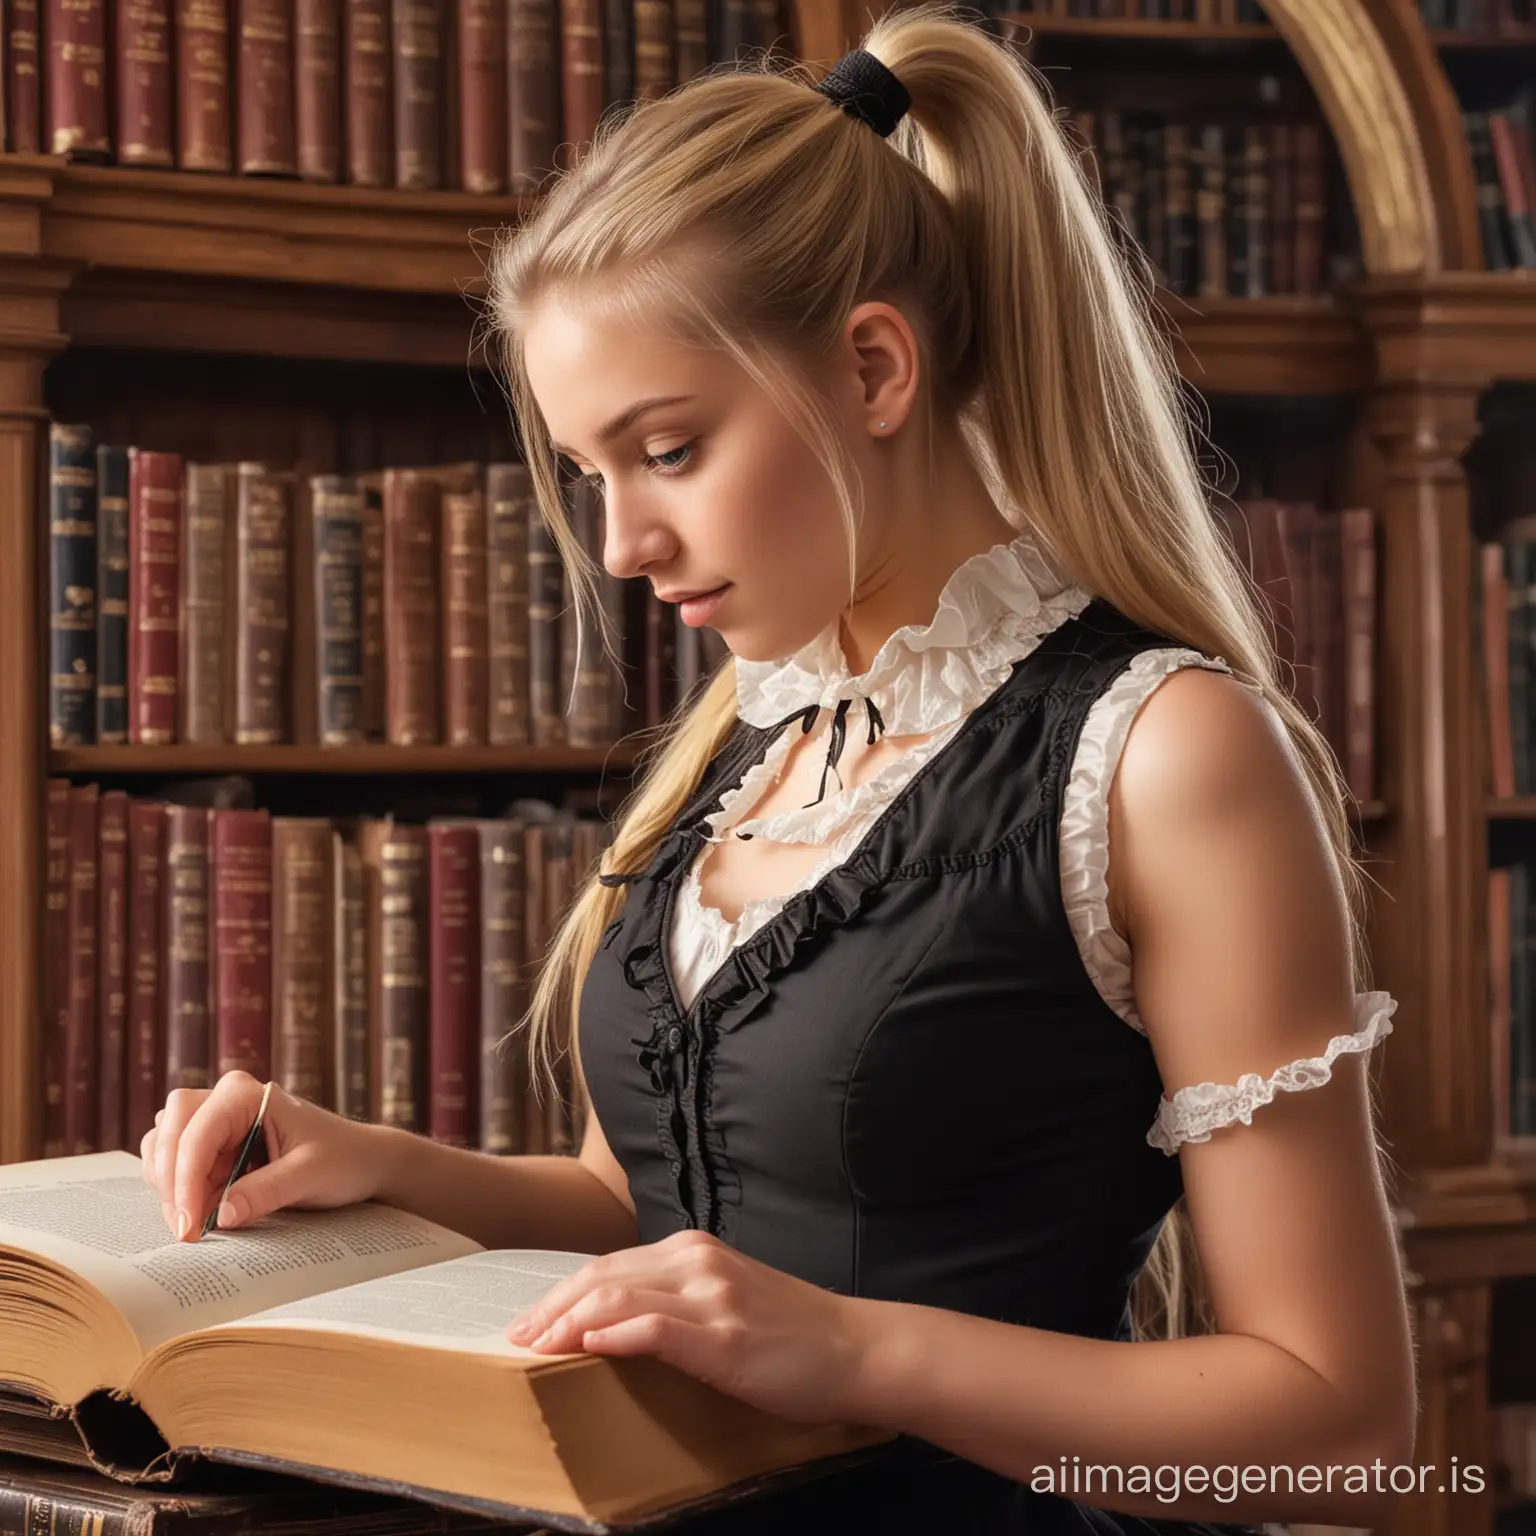 Teenage-Girl-Reading-Vintage-Book-in-Grand-Victorian-Library